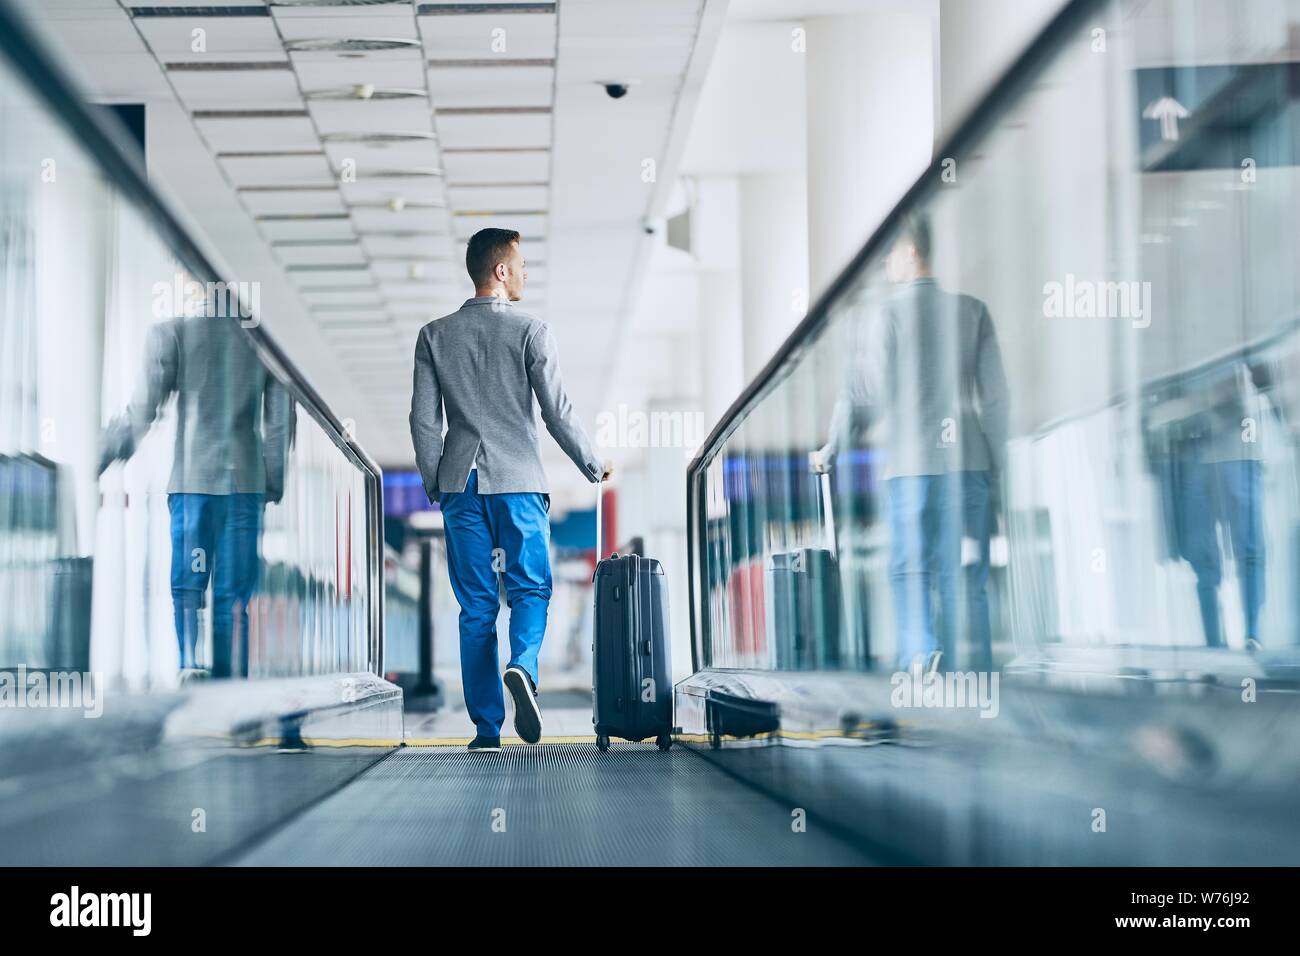 Well dressed young man travel by airplane. Businessman with luggage walking on travelator at airport. Stock Photo